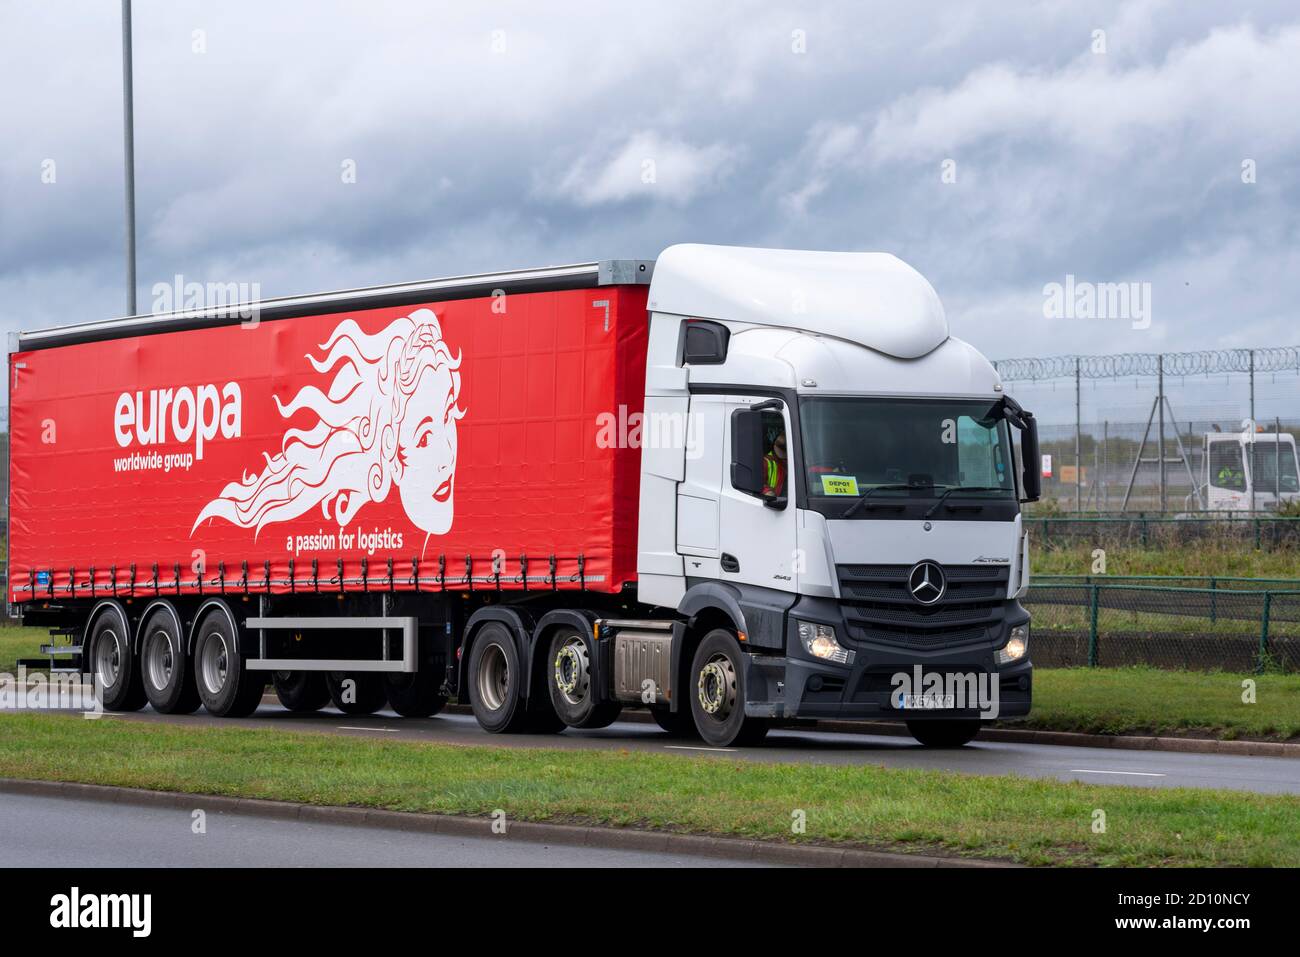 Europa worldwide group, transport, logistics, lorry passing London Heathrow Airport, UK. Mercedes articulated curtain sider, tautliner vehicle Stock Photo